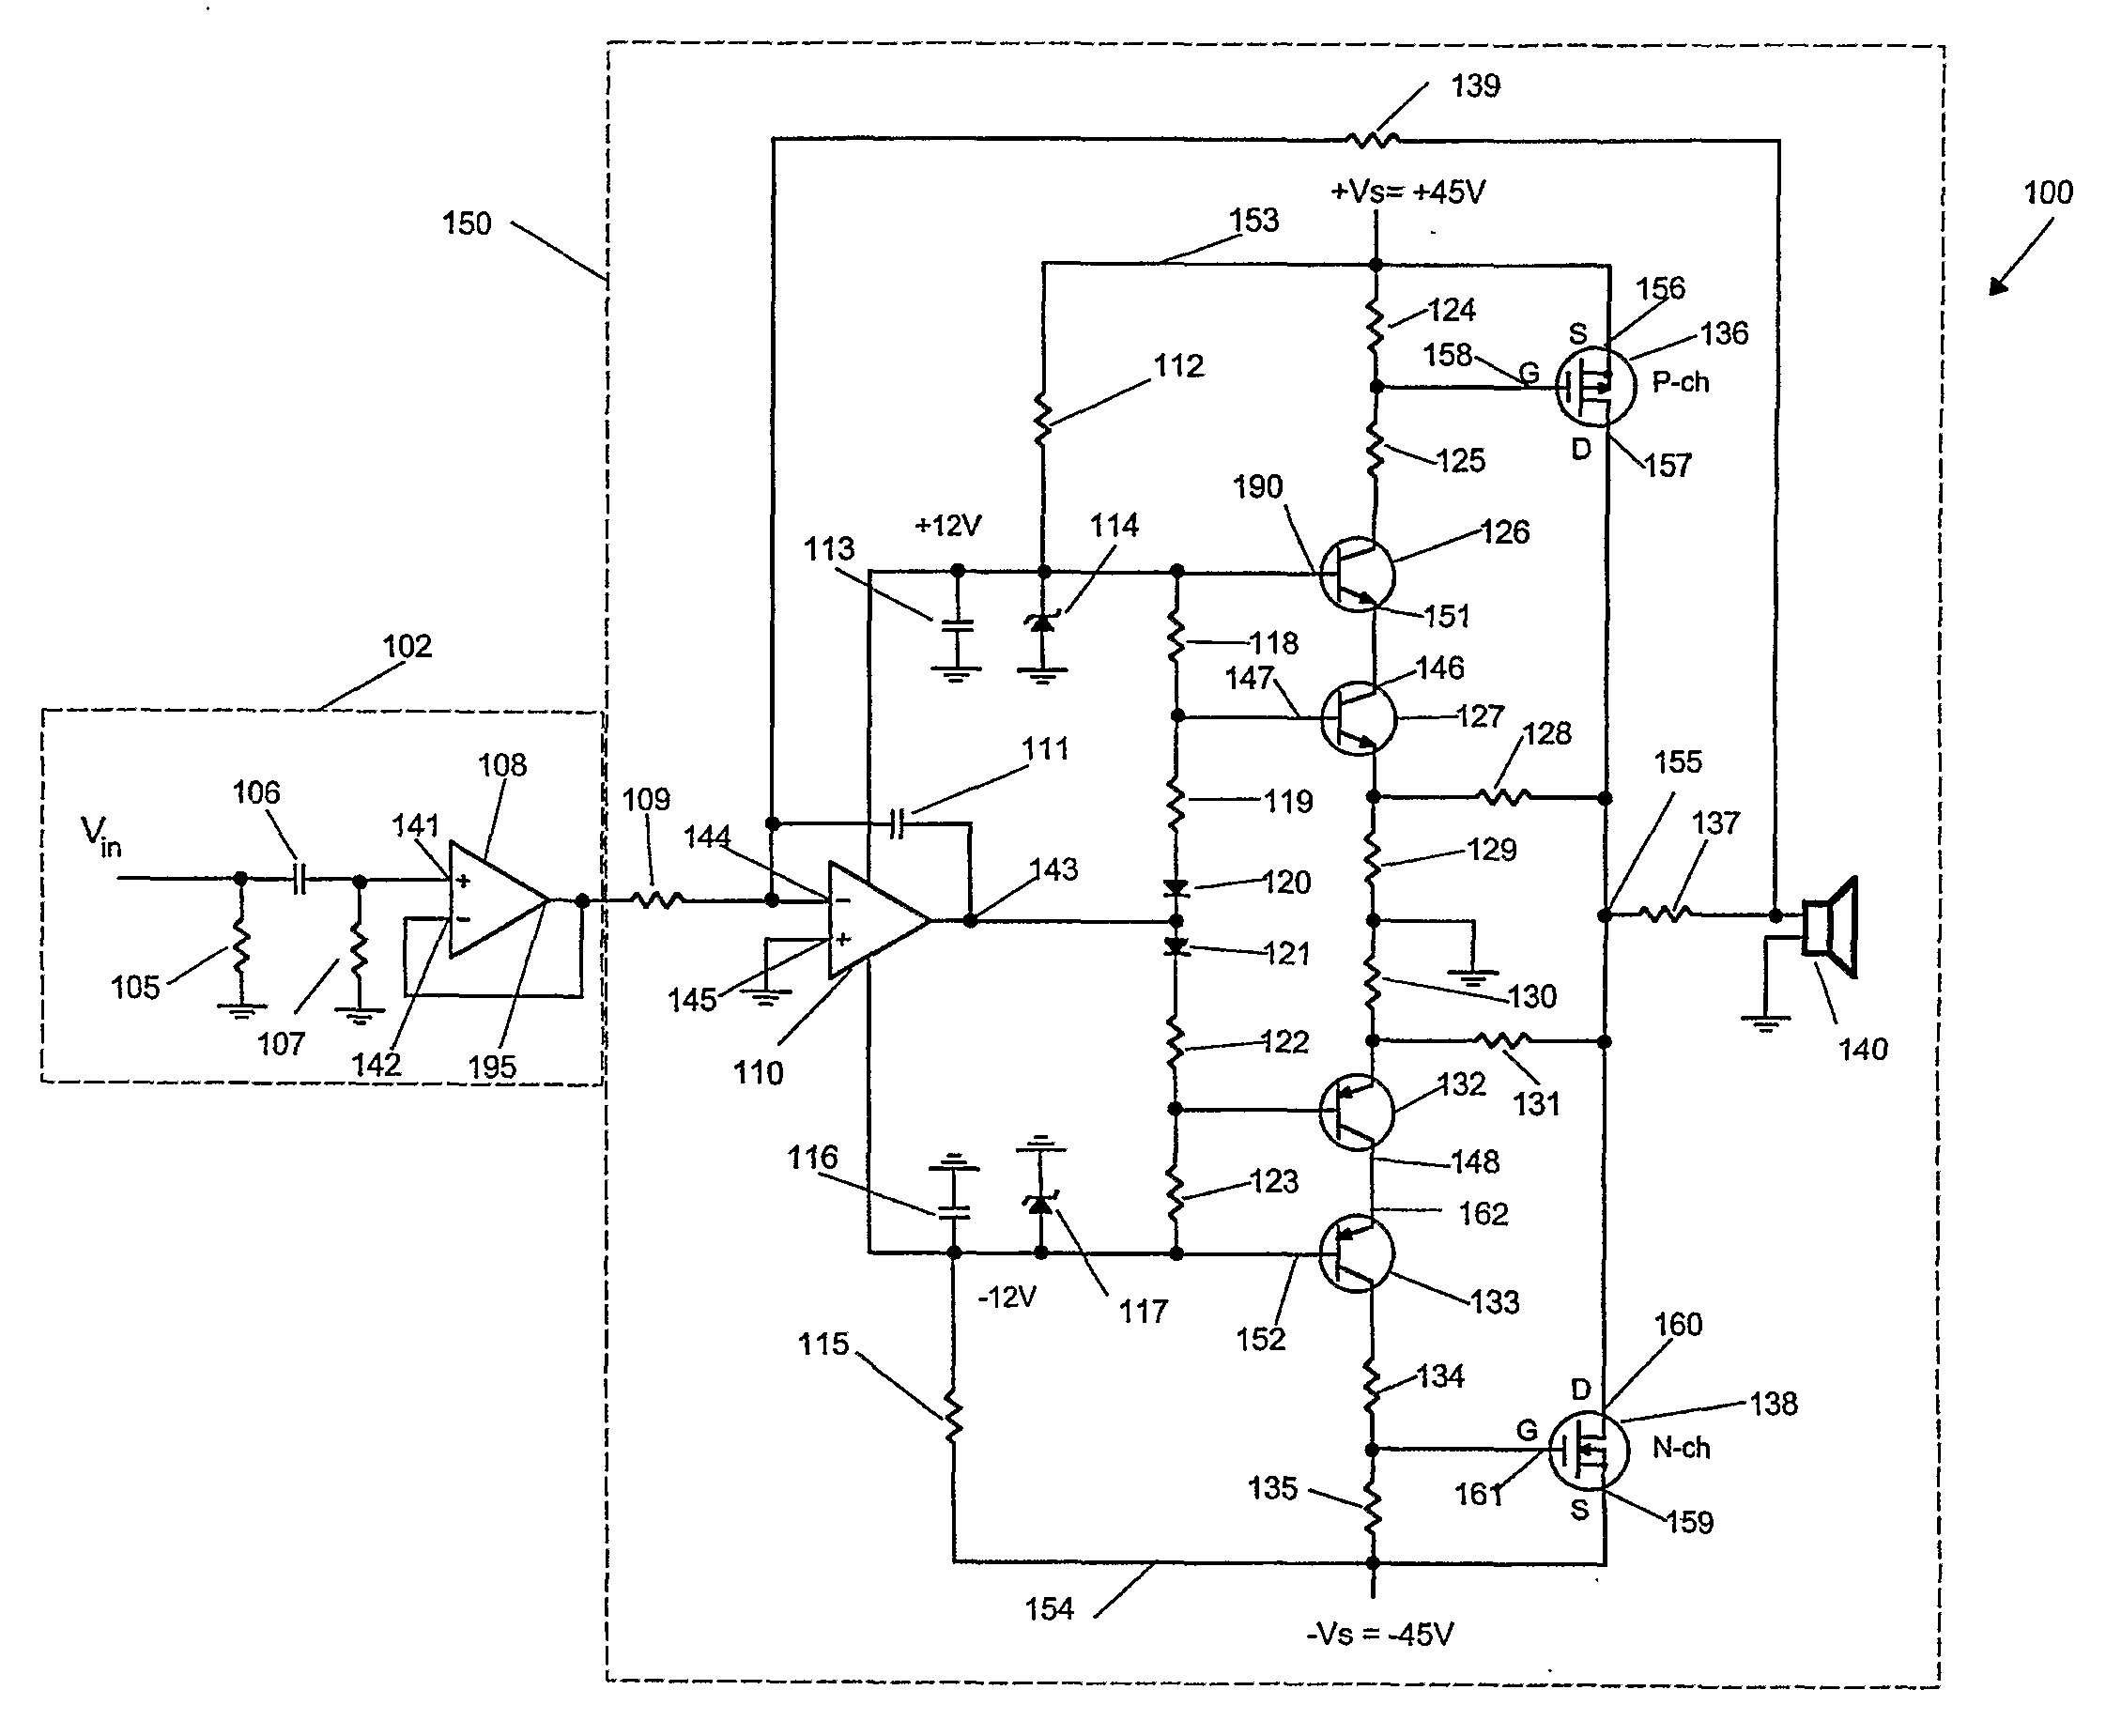 Medium Voltage or High Voltage Audio Power Amplifier and Protection Circuit